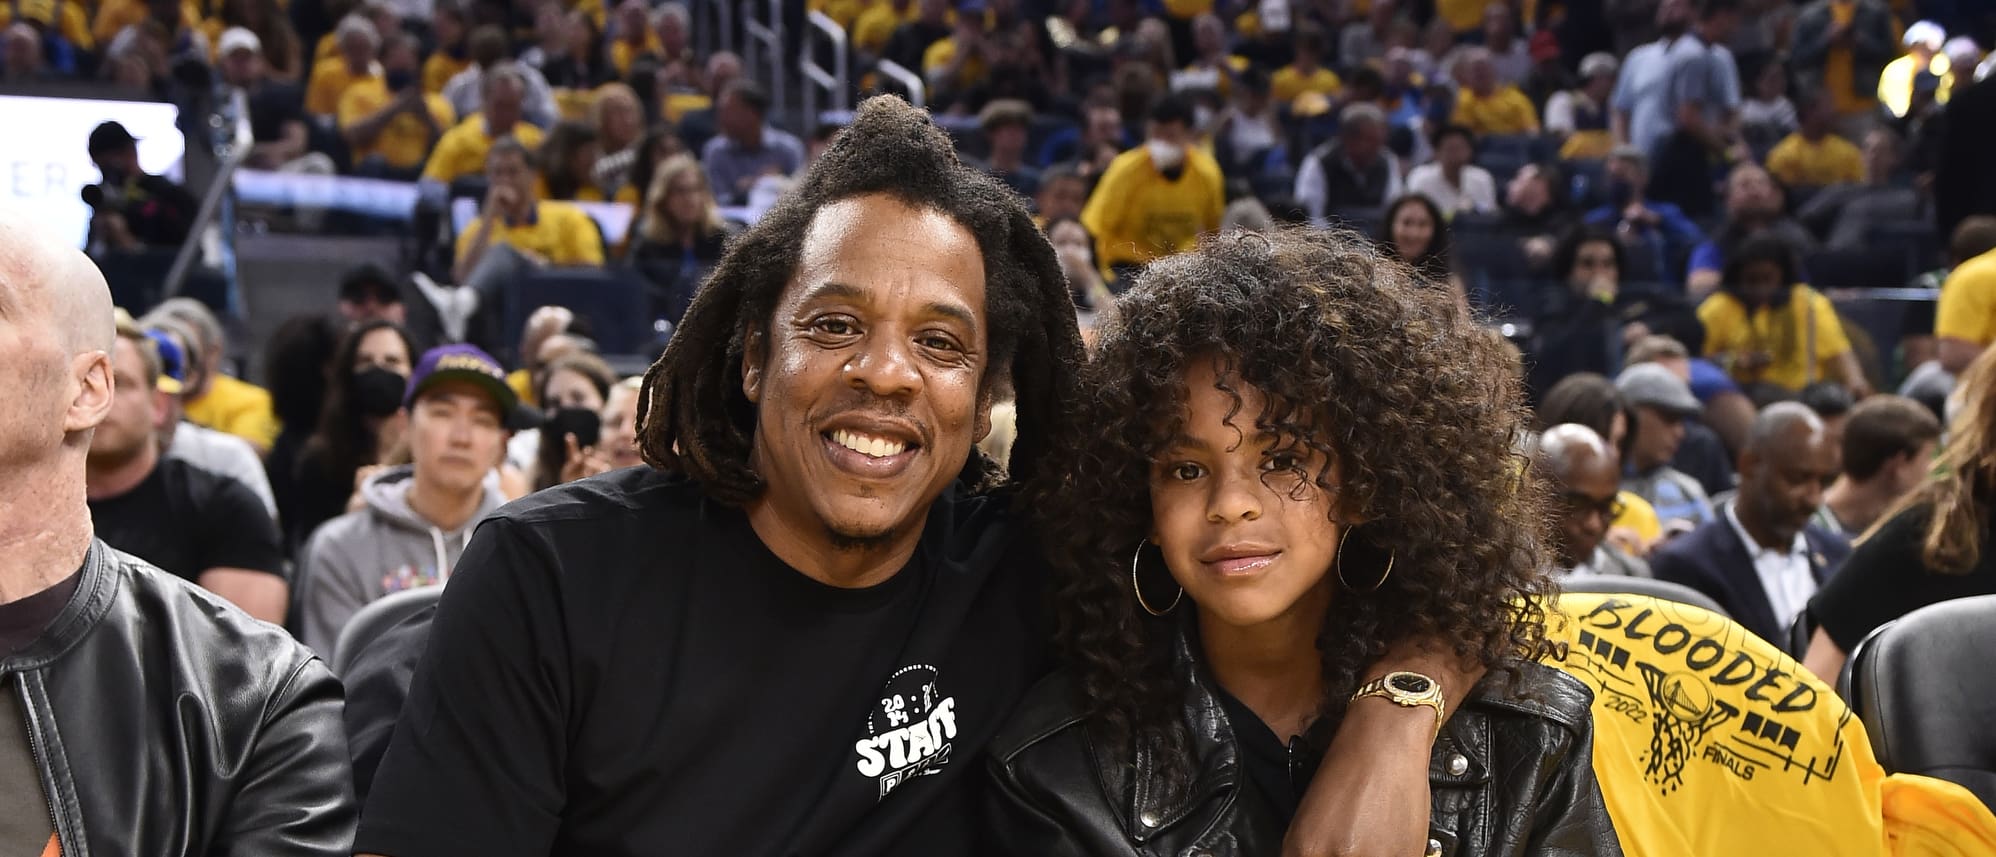 ”fans-gush-over-blue-ivys-hair-at-nba-game-with-jay-z-call-her-her-mamas-twin”